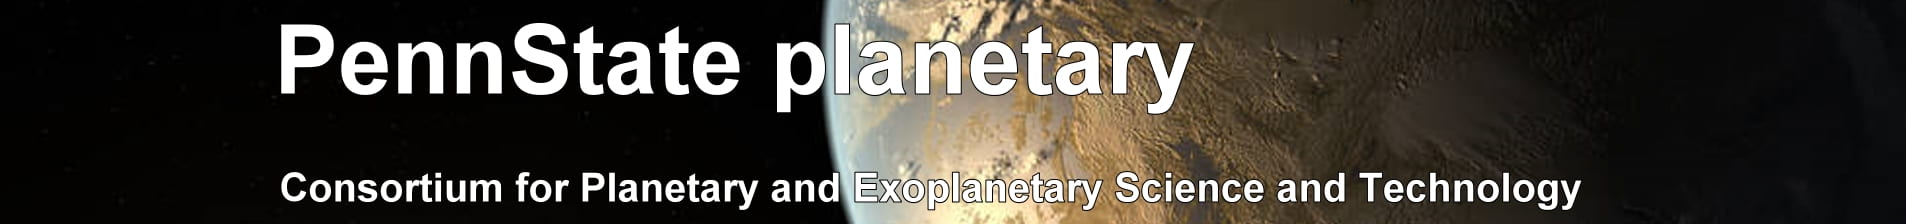 Header image for Consortium for Planetary and Exoplanetary Science and Technology